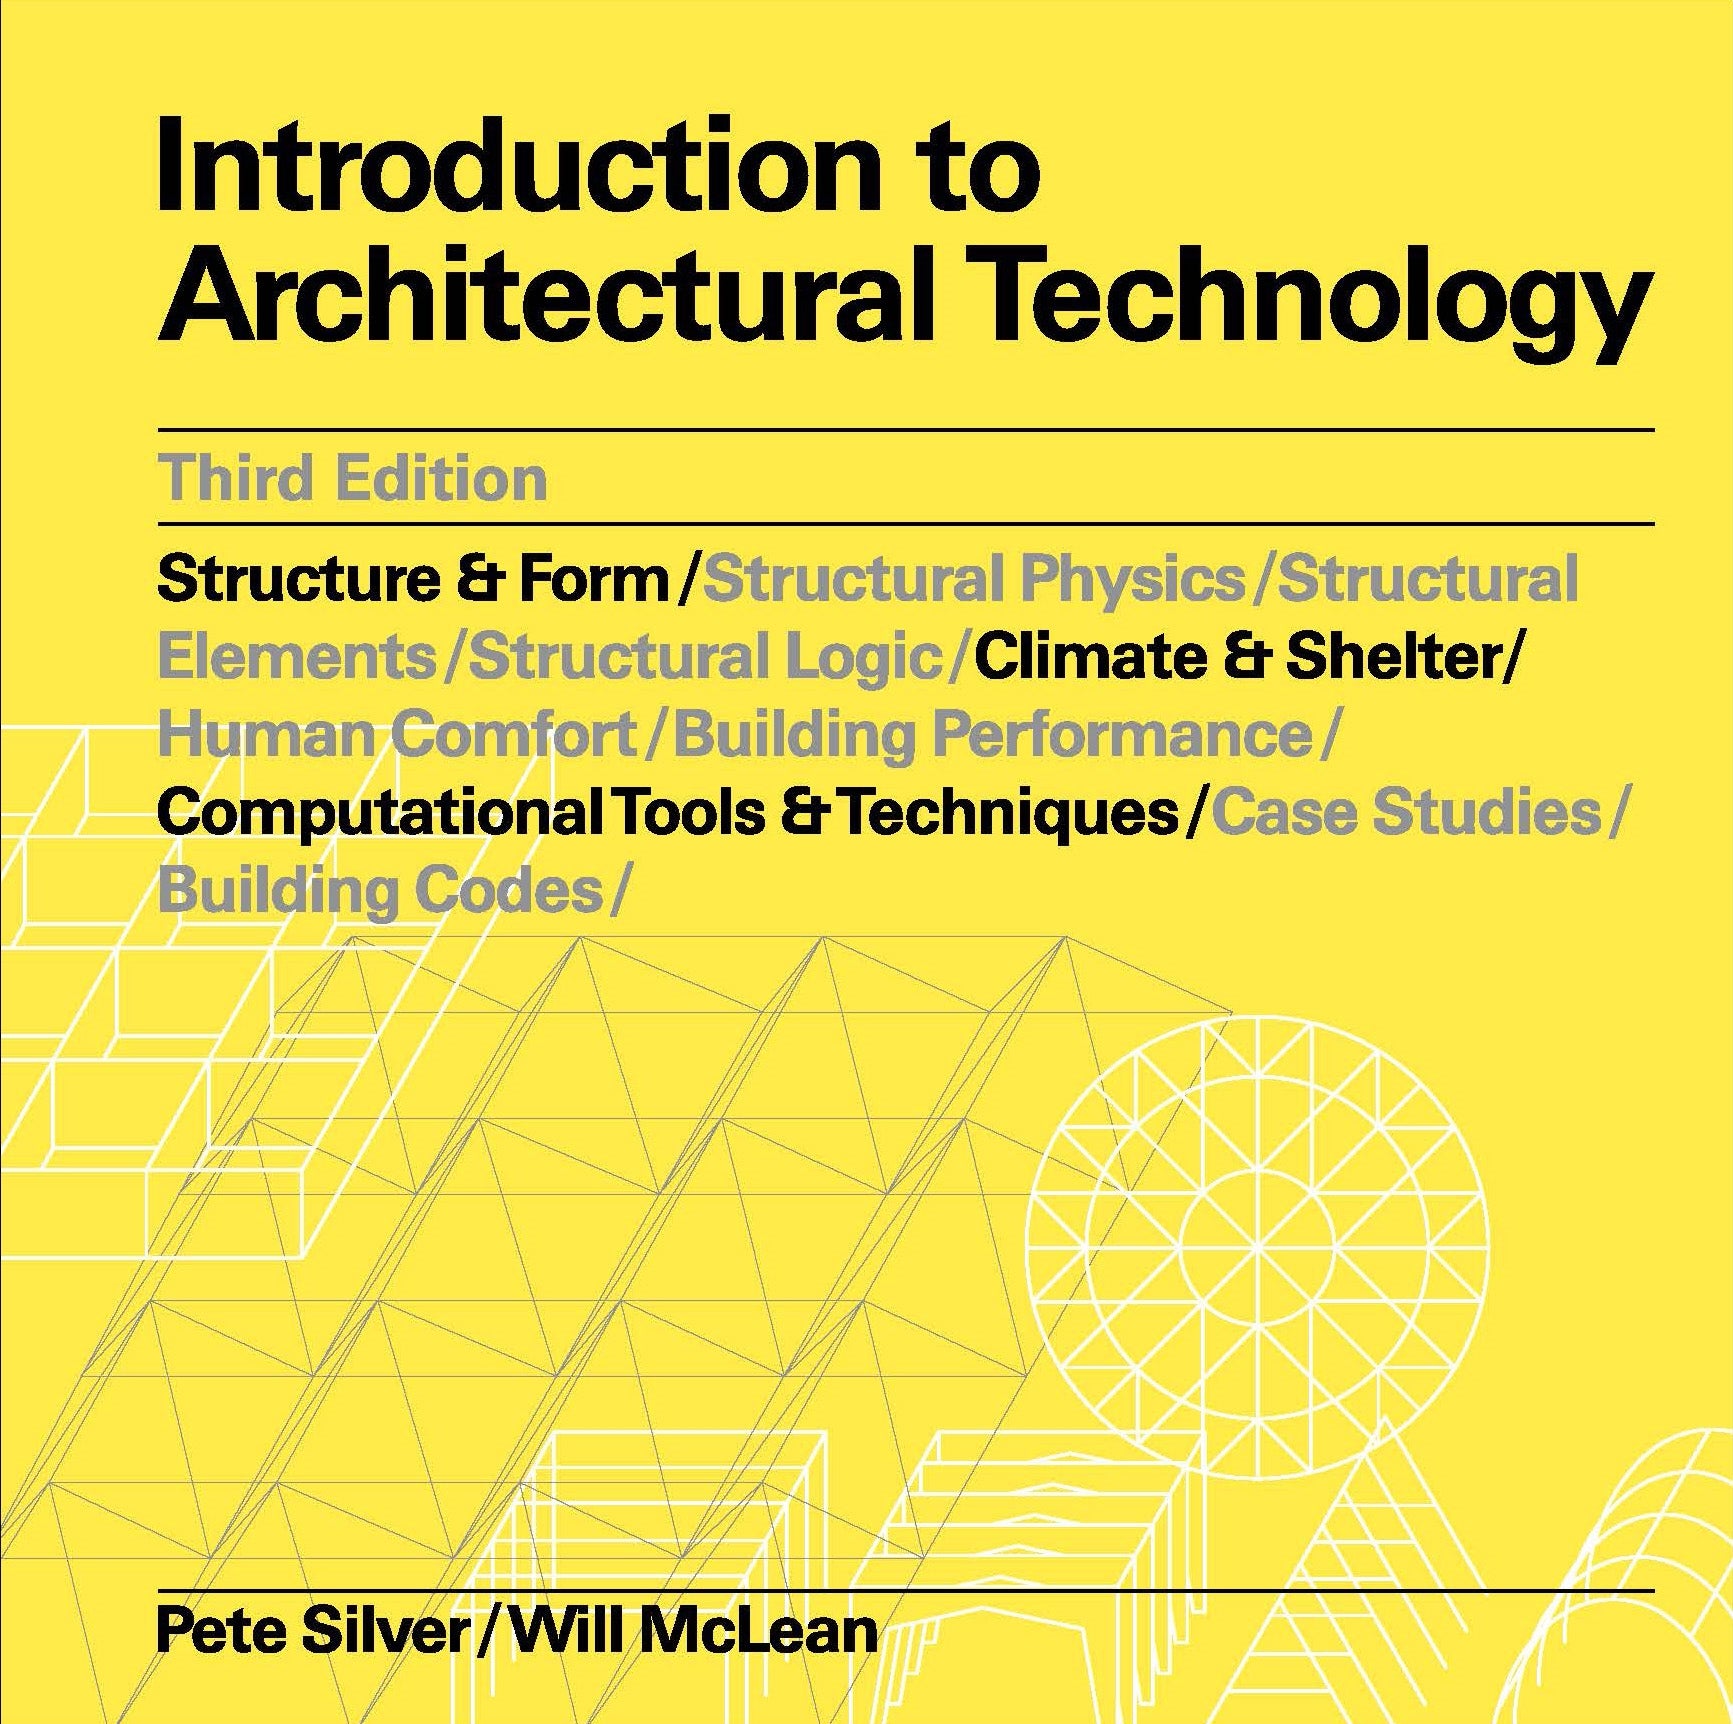 Introduction to Architectural Technology Third Edition by Pete Silver, Will McLean